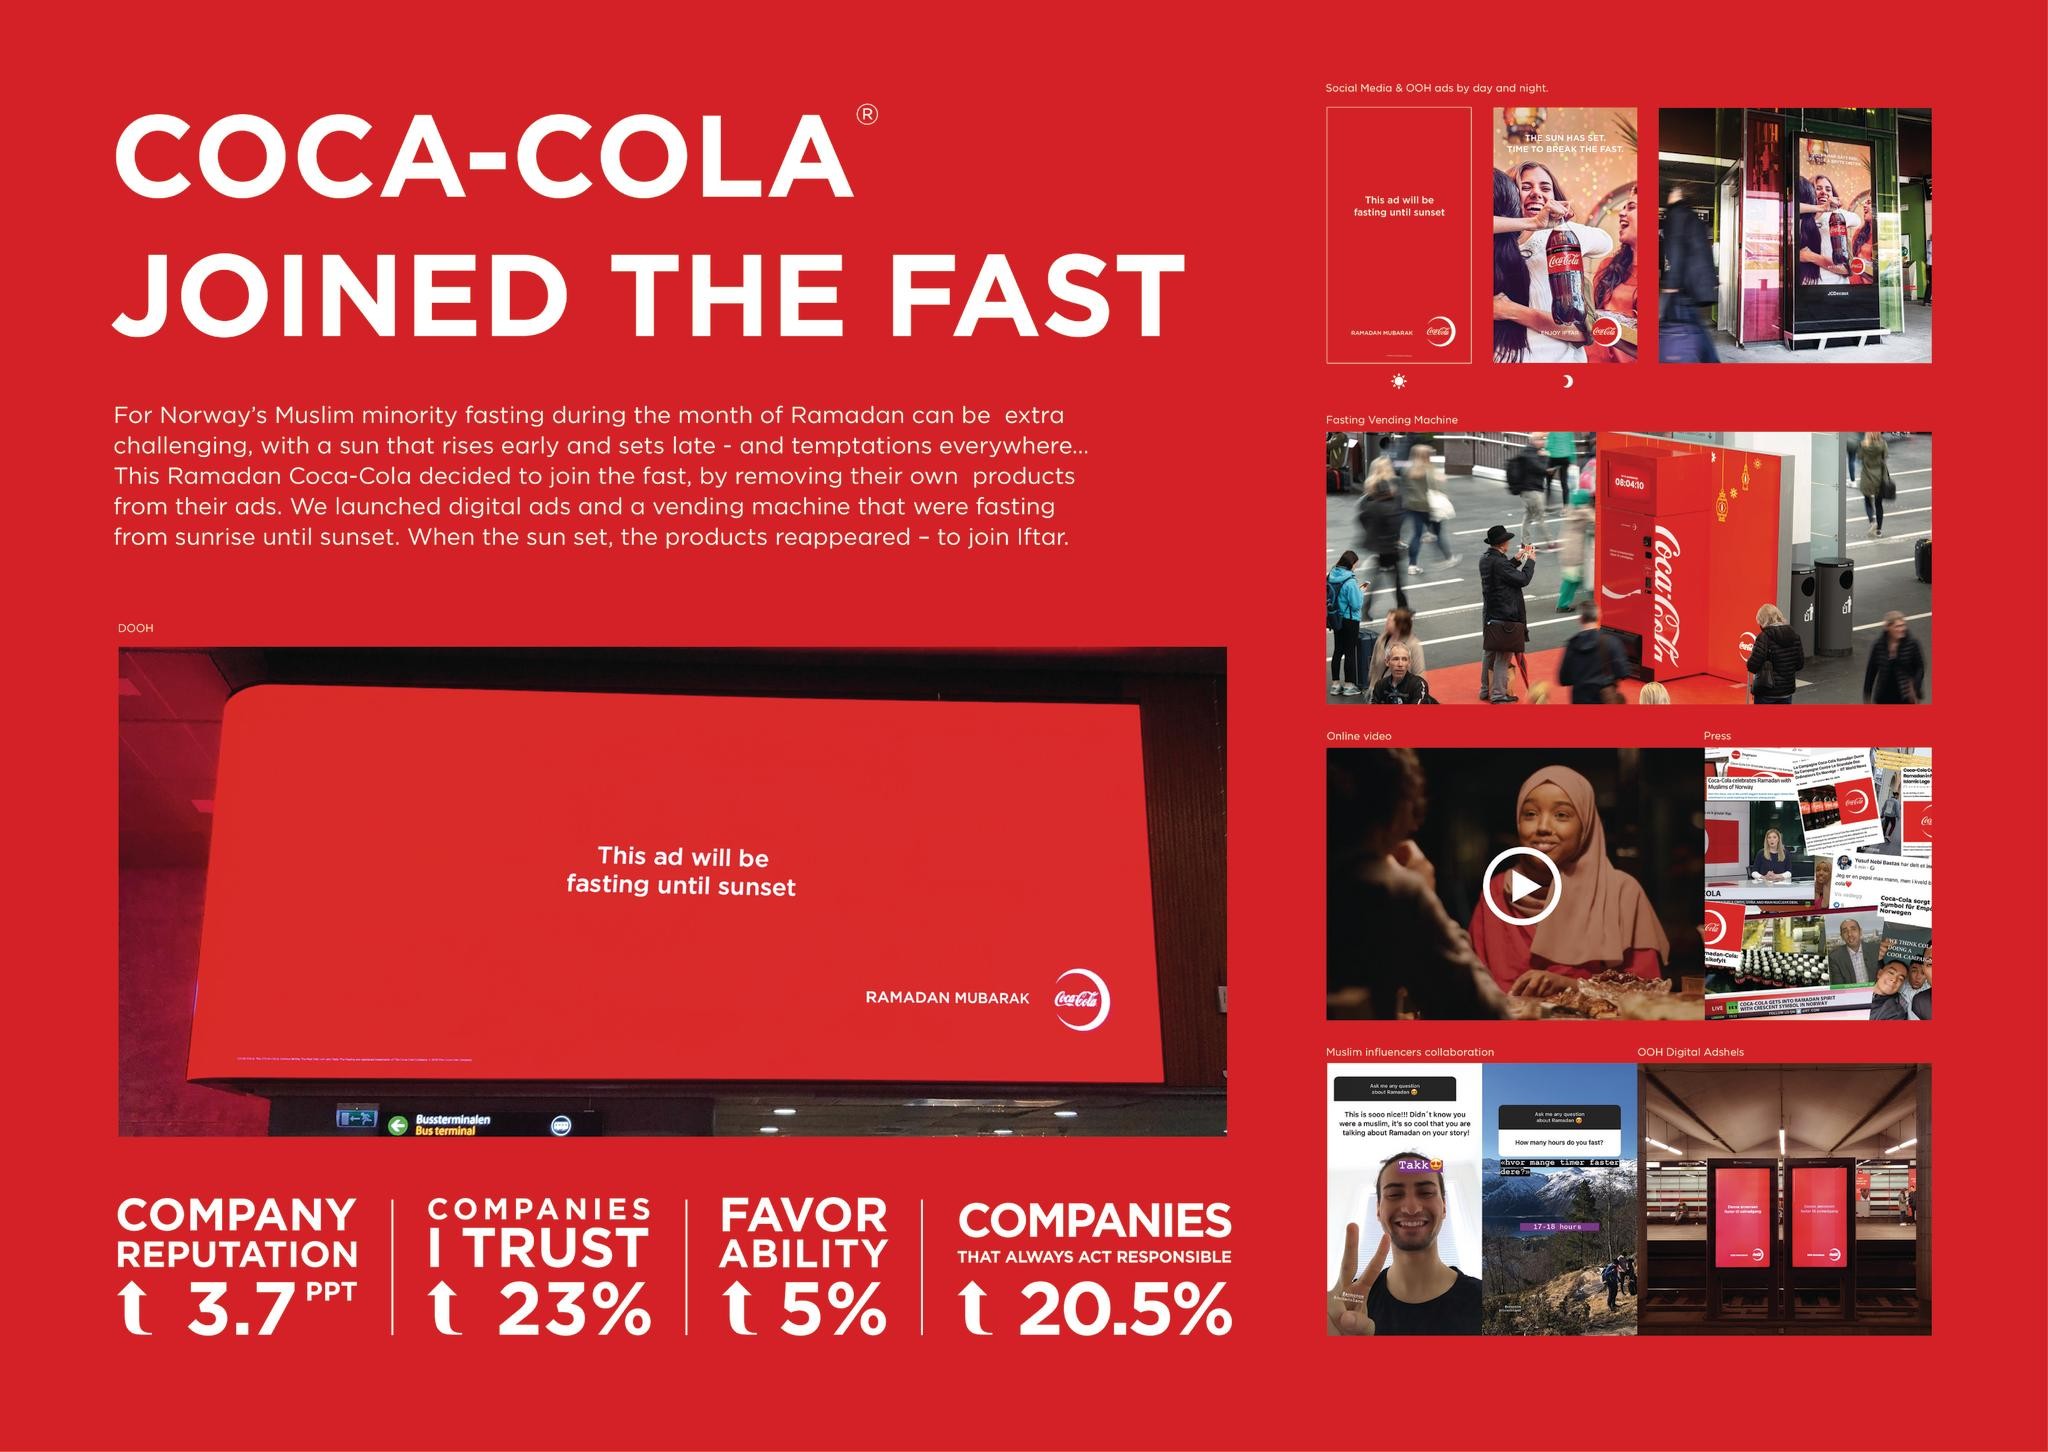 Coca-Cola joined the fast!